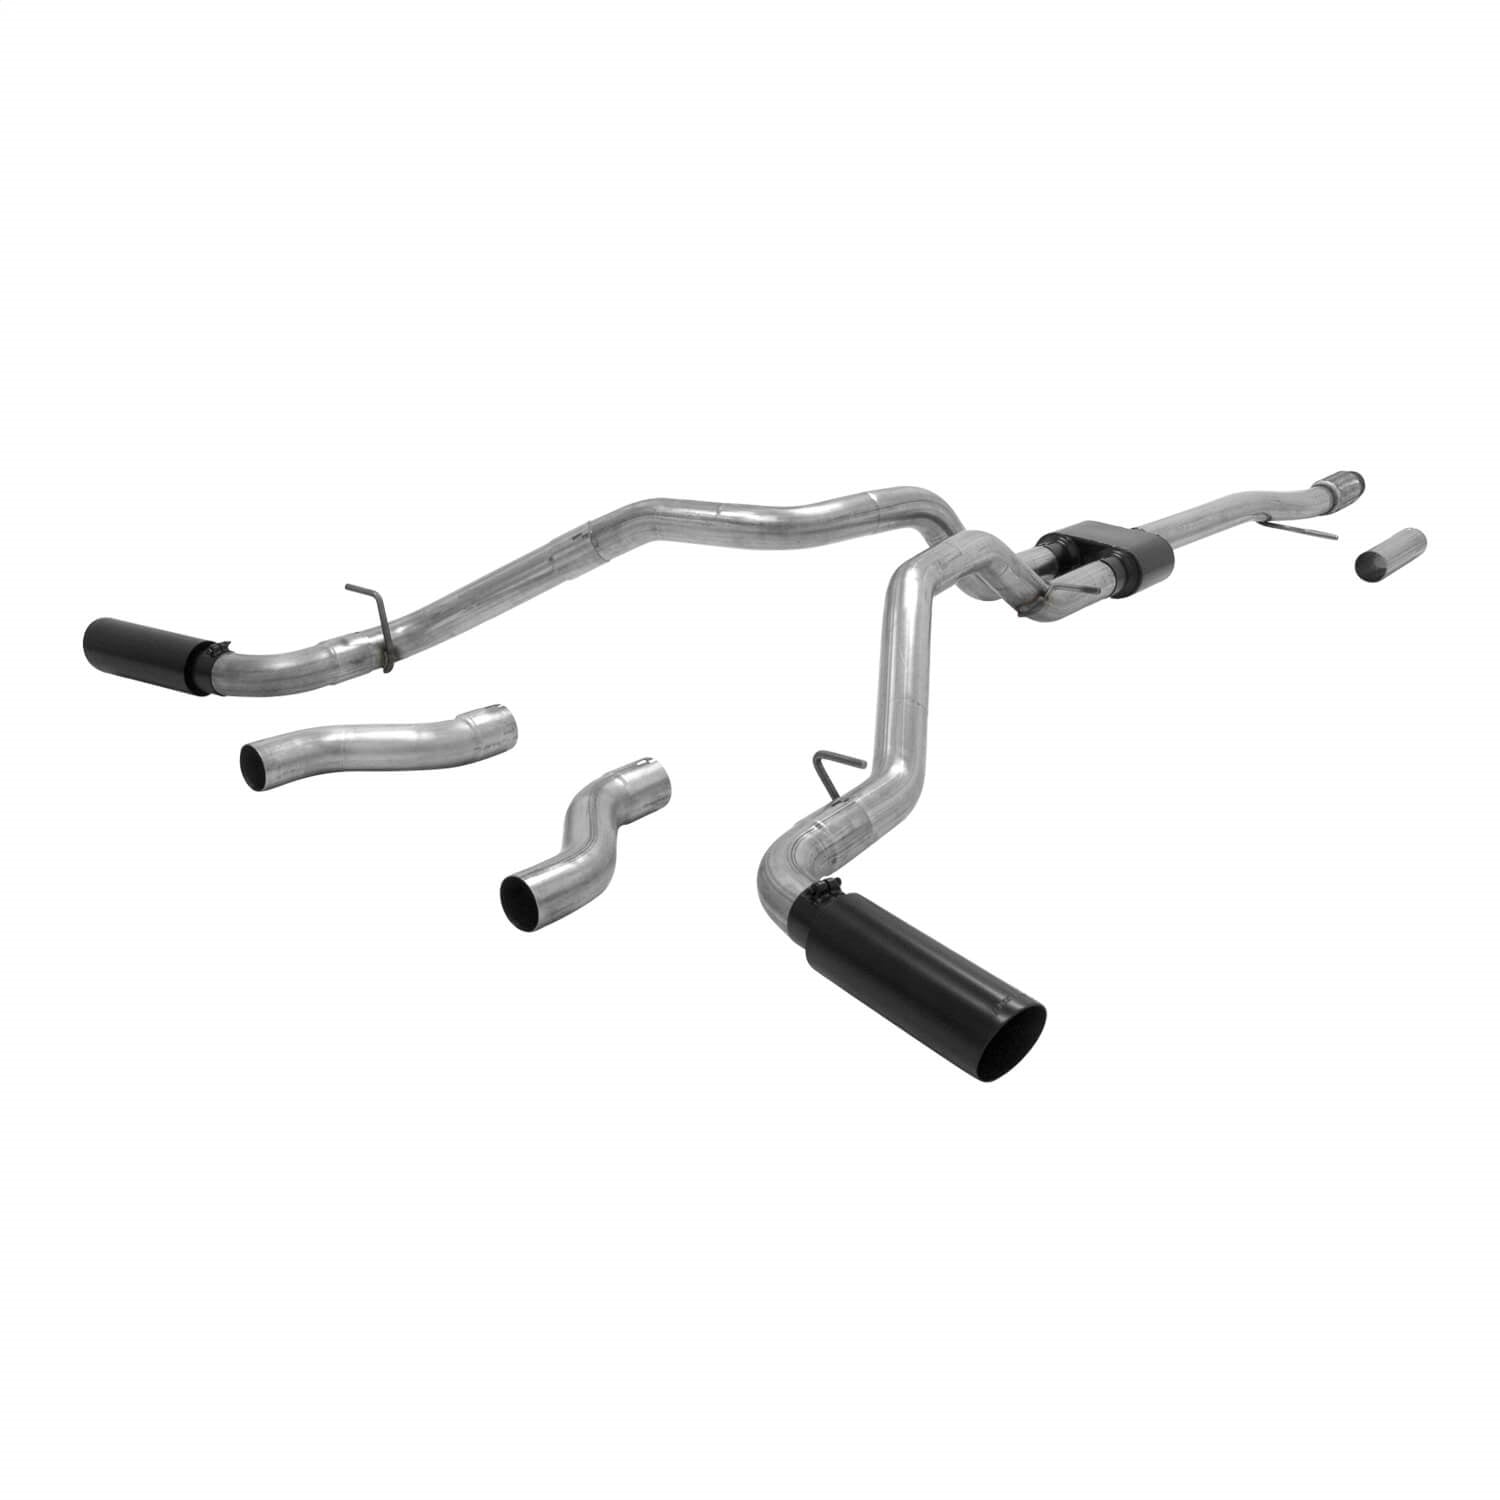 Flowmaster 817689 Outlaw Series Cat Back Exhaust System